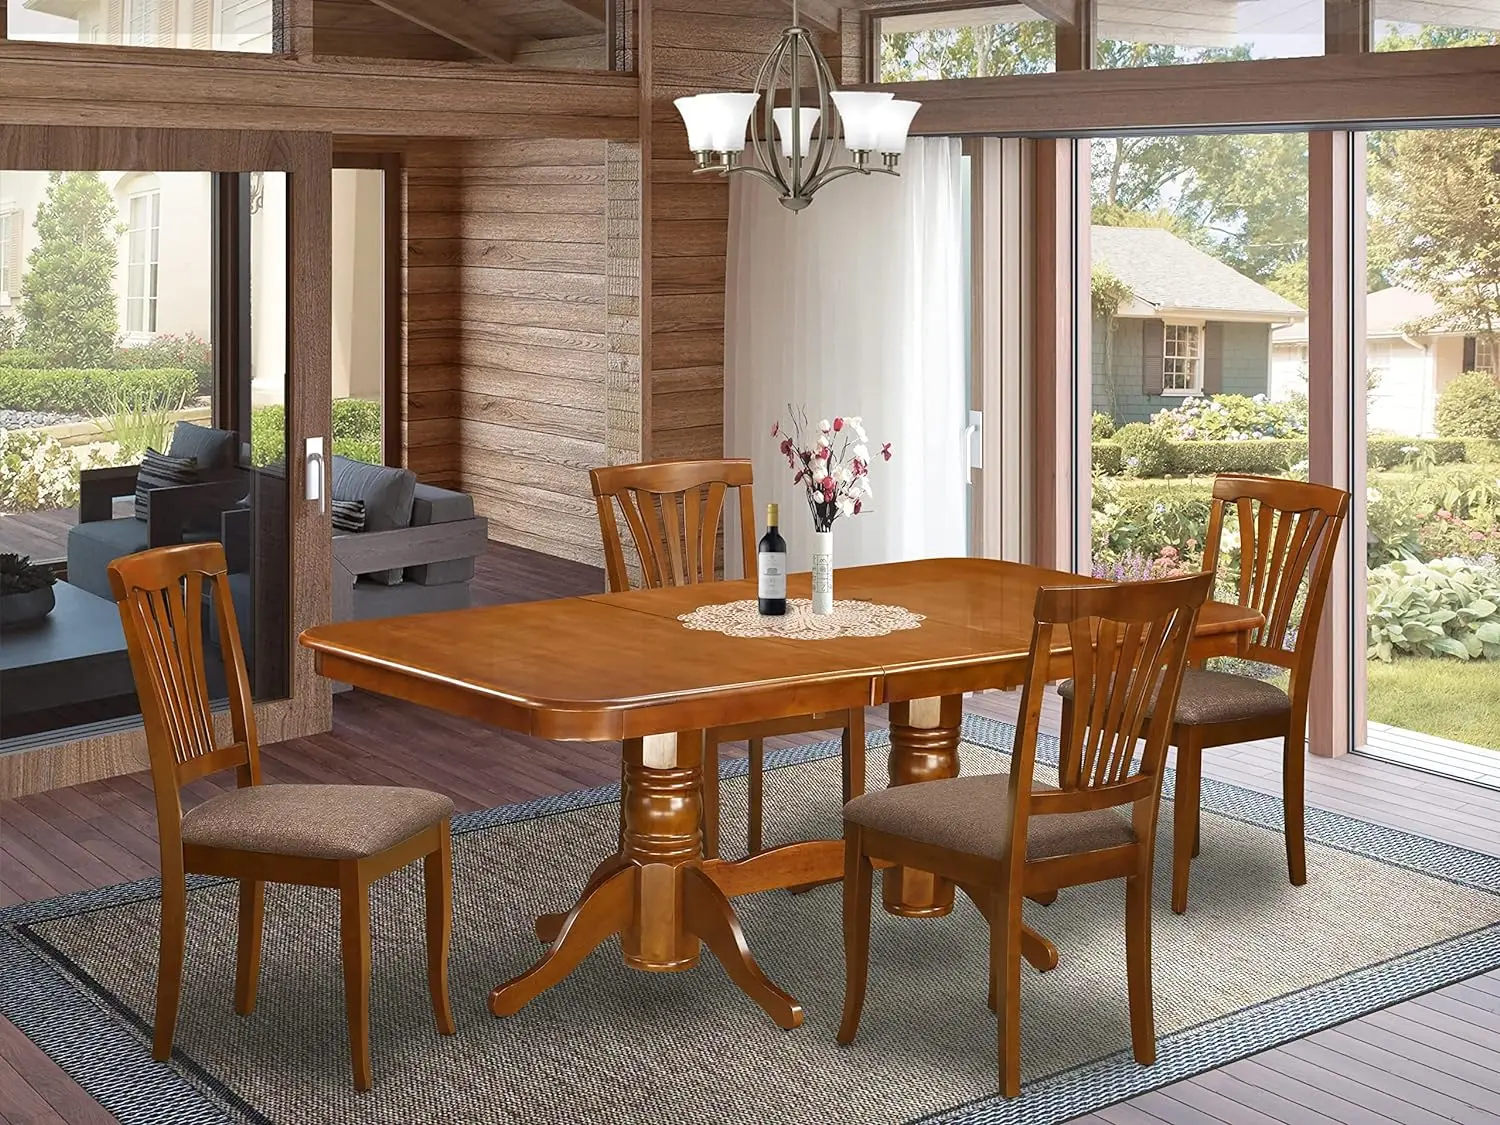 

Furniture 5 Piece Set Includes a Rectangle Dining Room Table with Butterfly Leaf and 4 Linen Fabric Upholstered Chairs